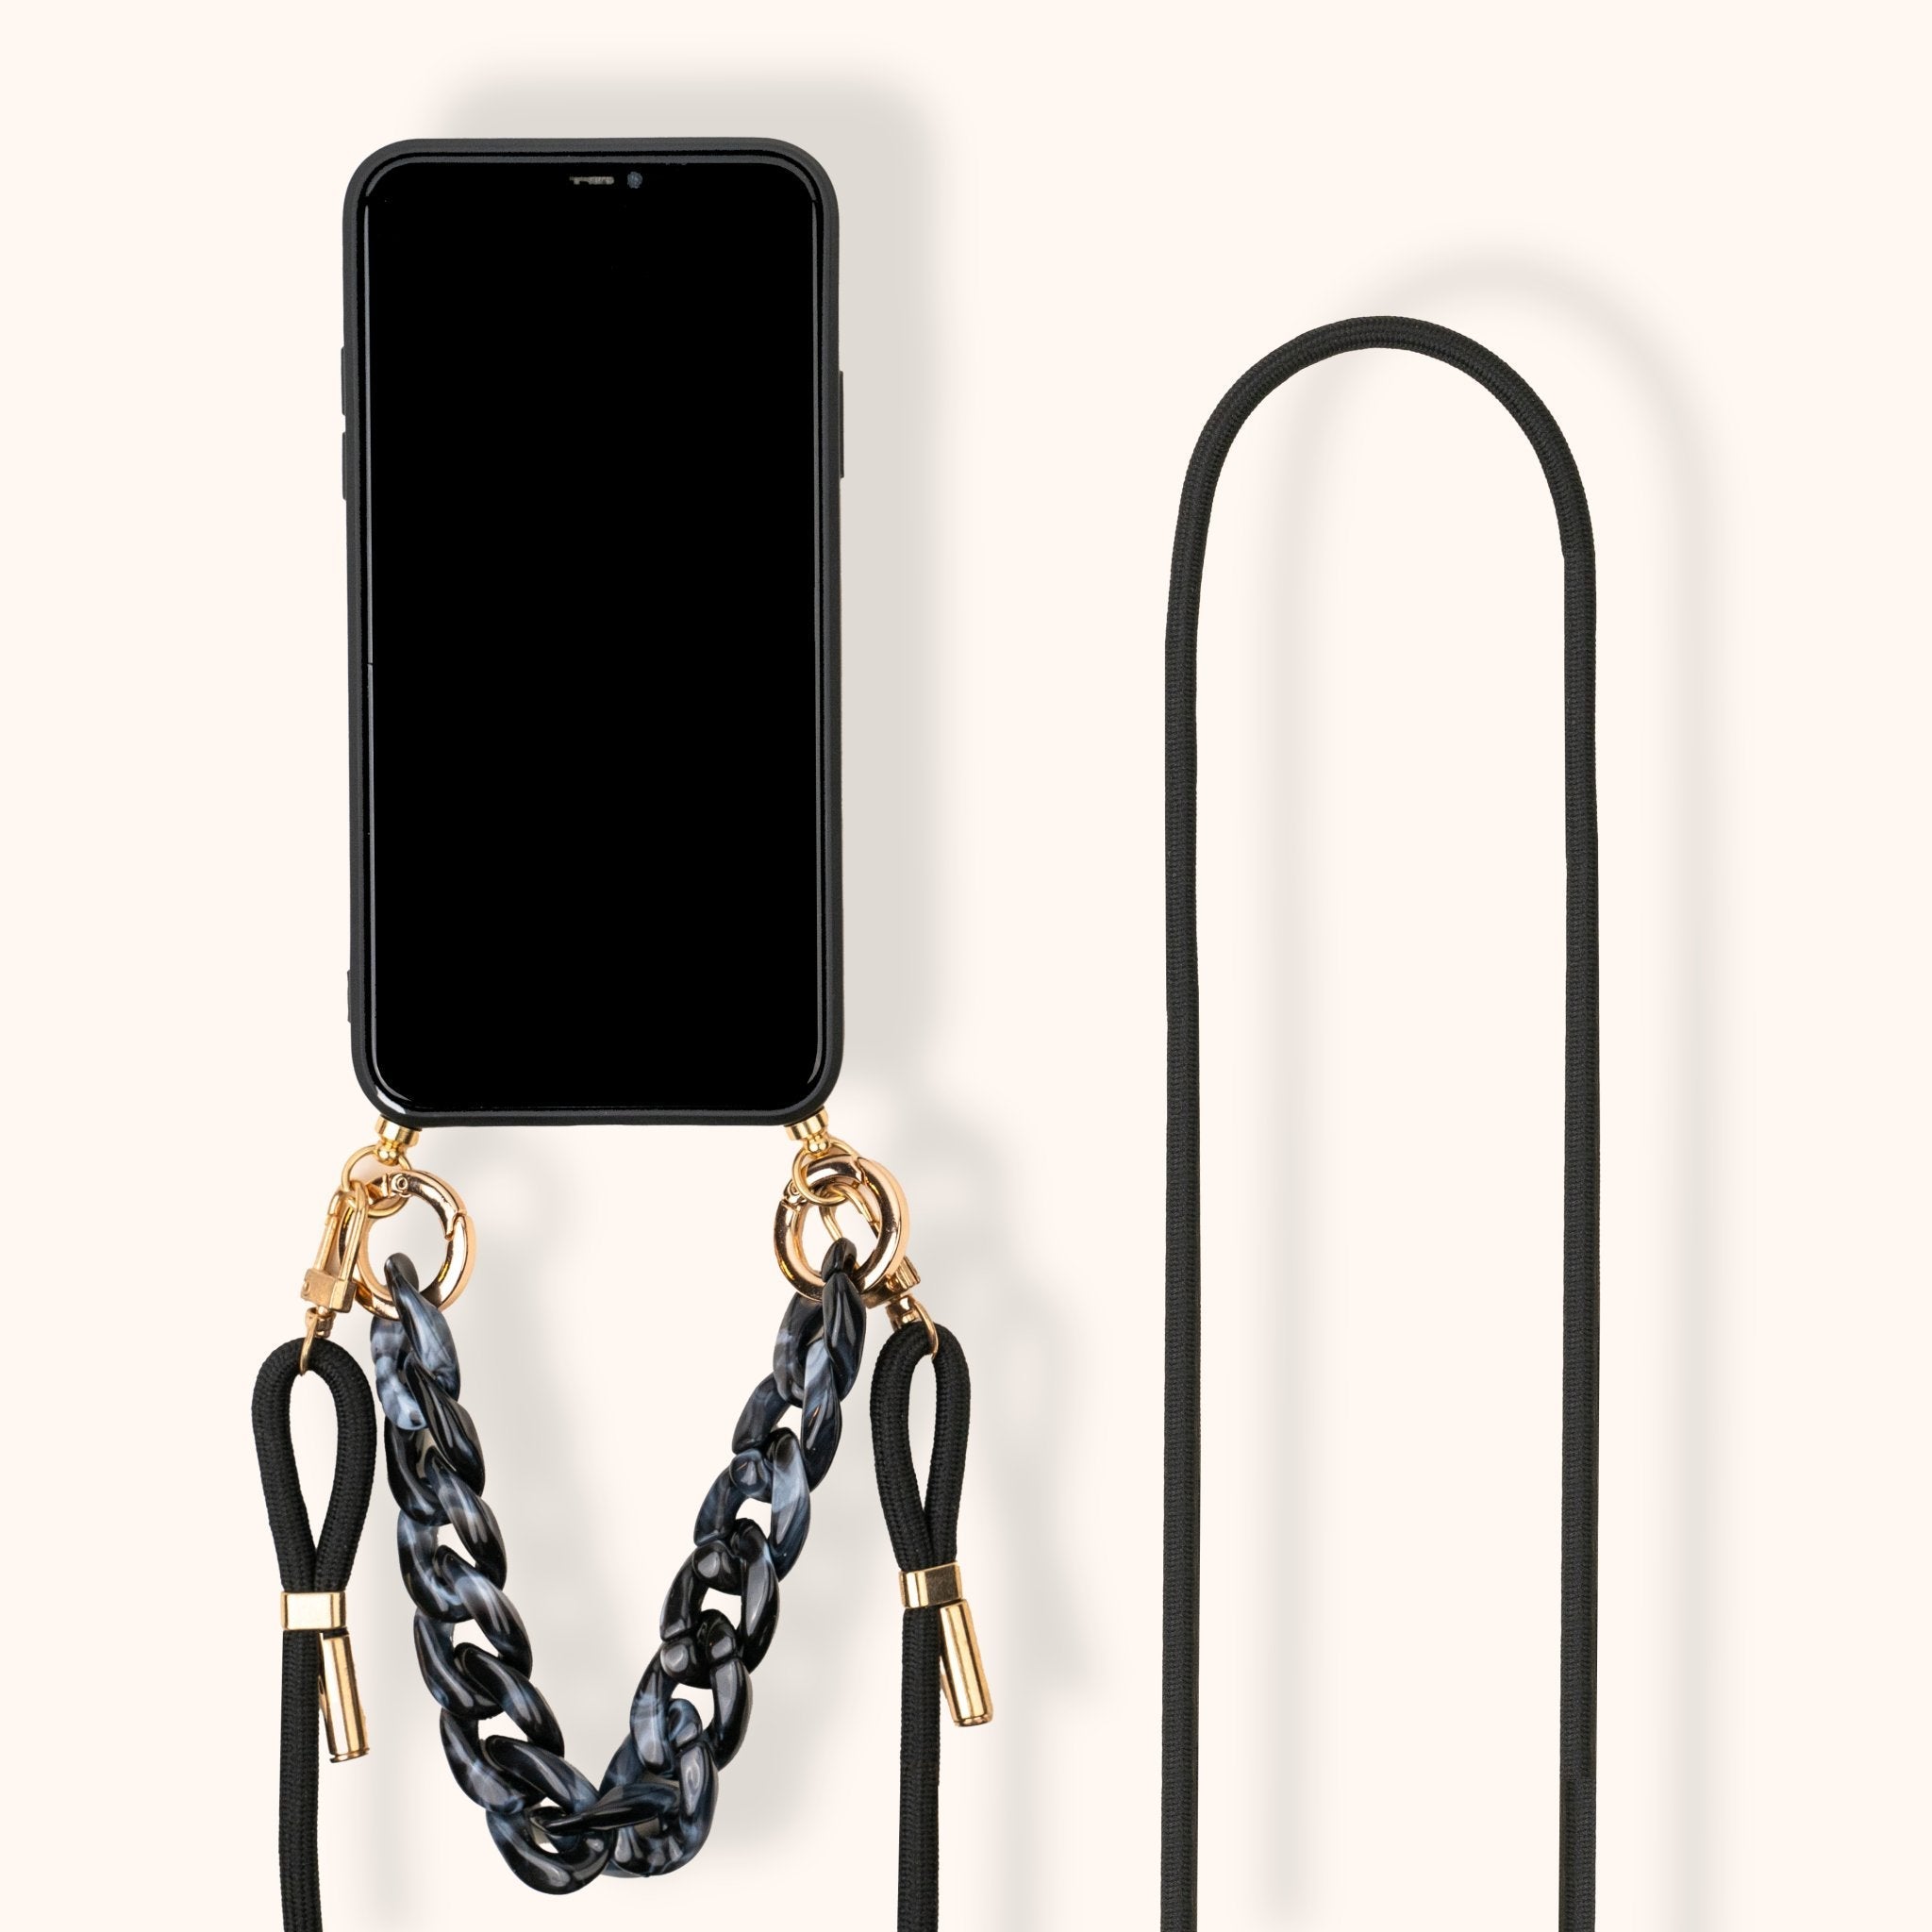 iPhone Strap Case "Amber Noir" - House Of Case